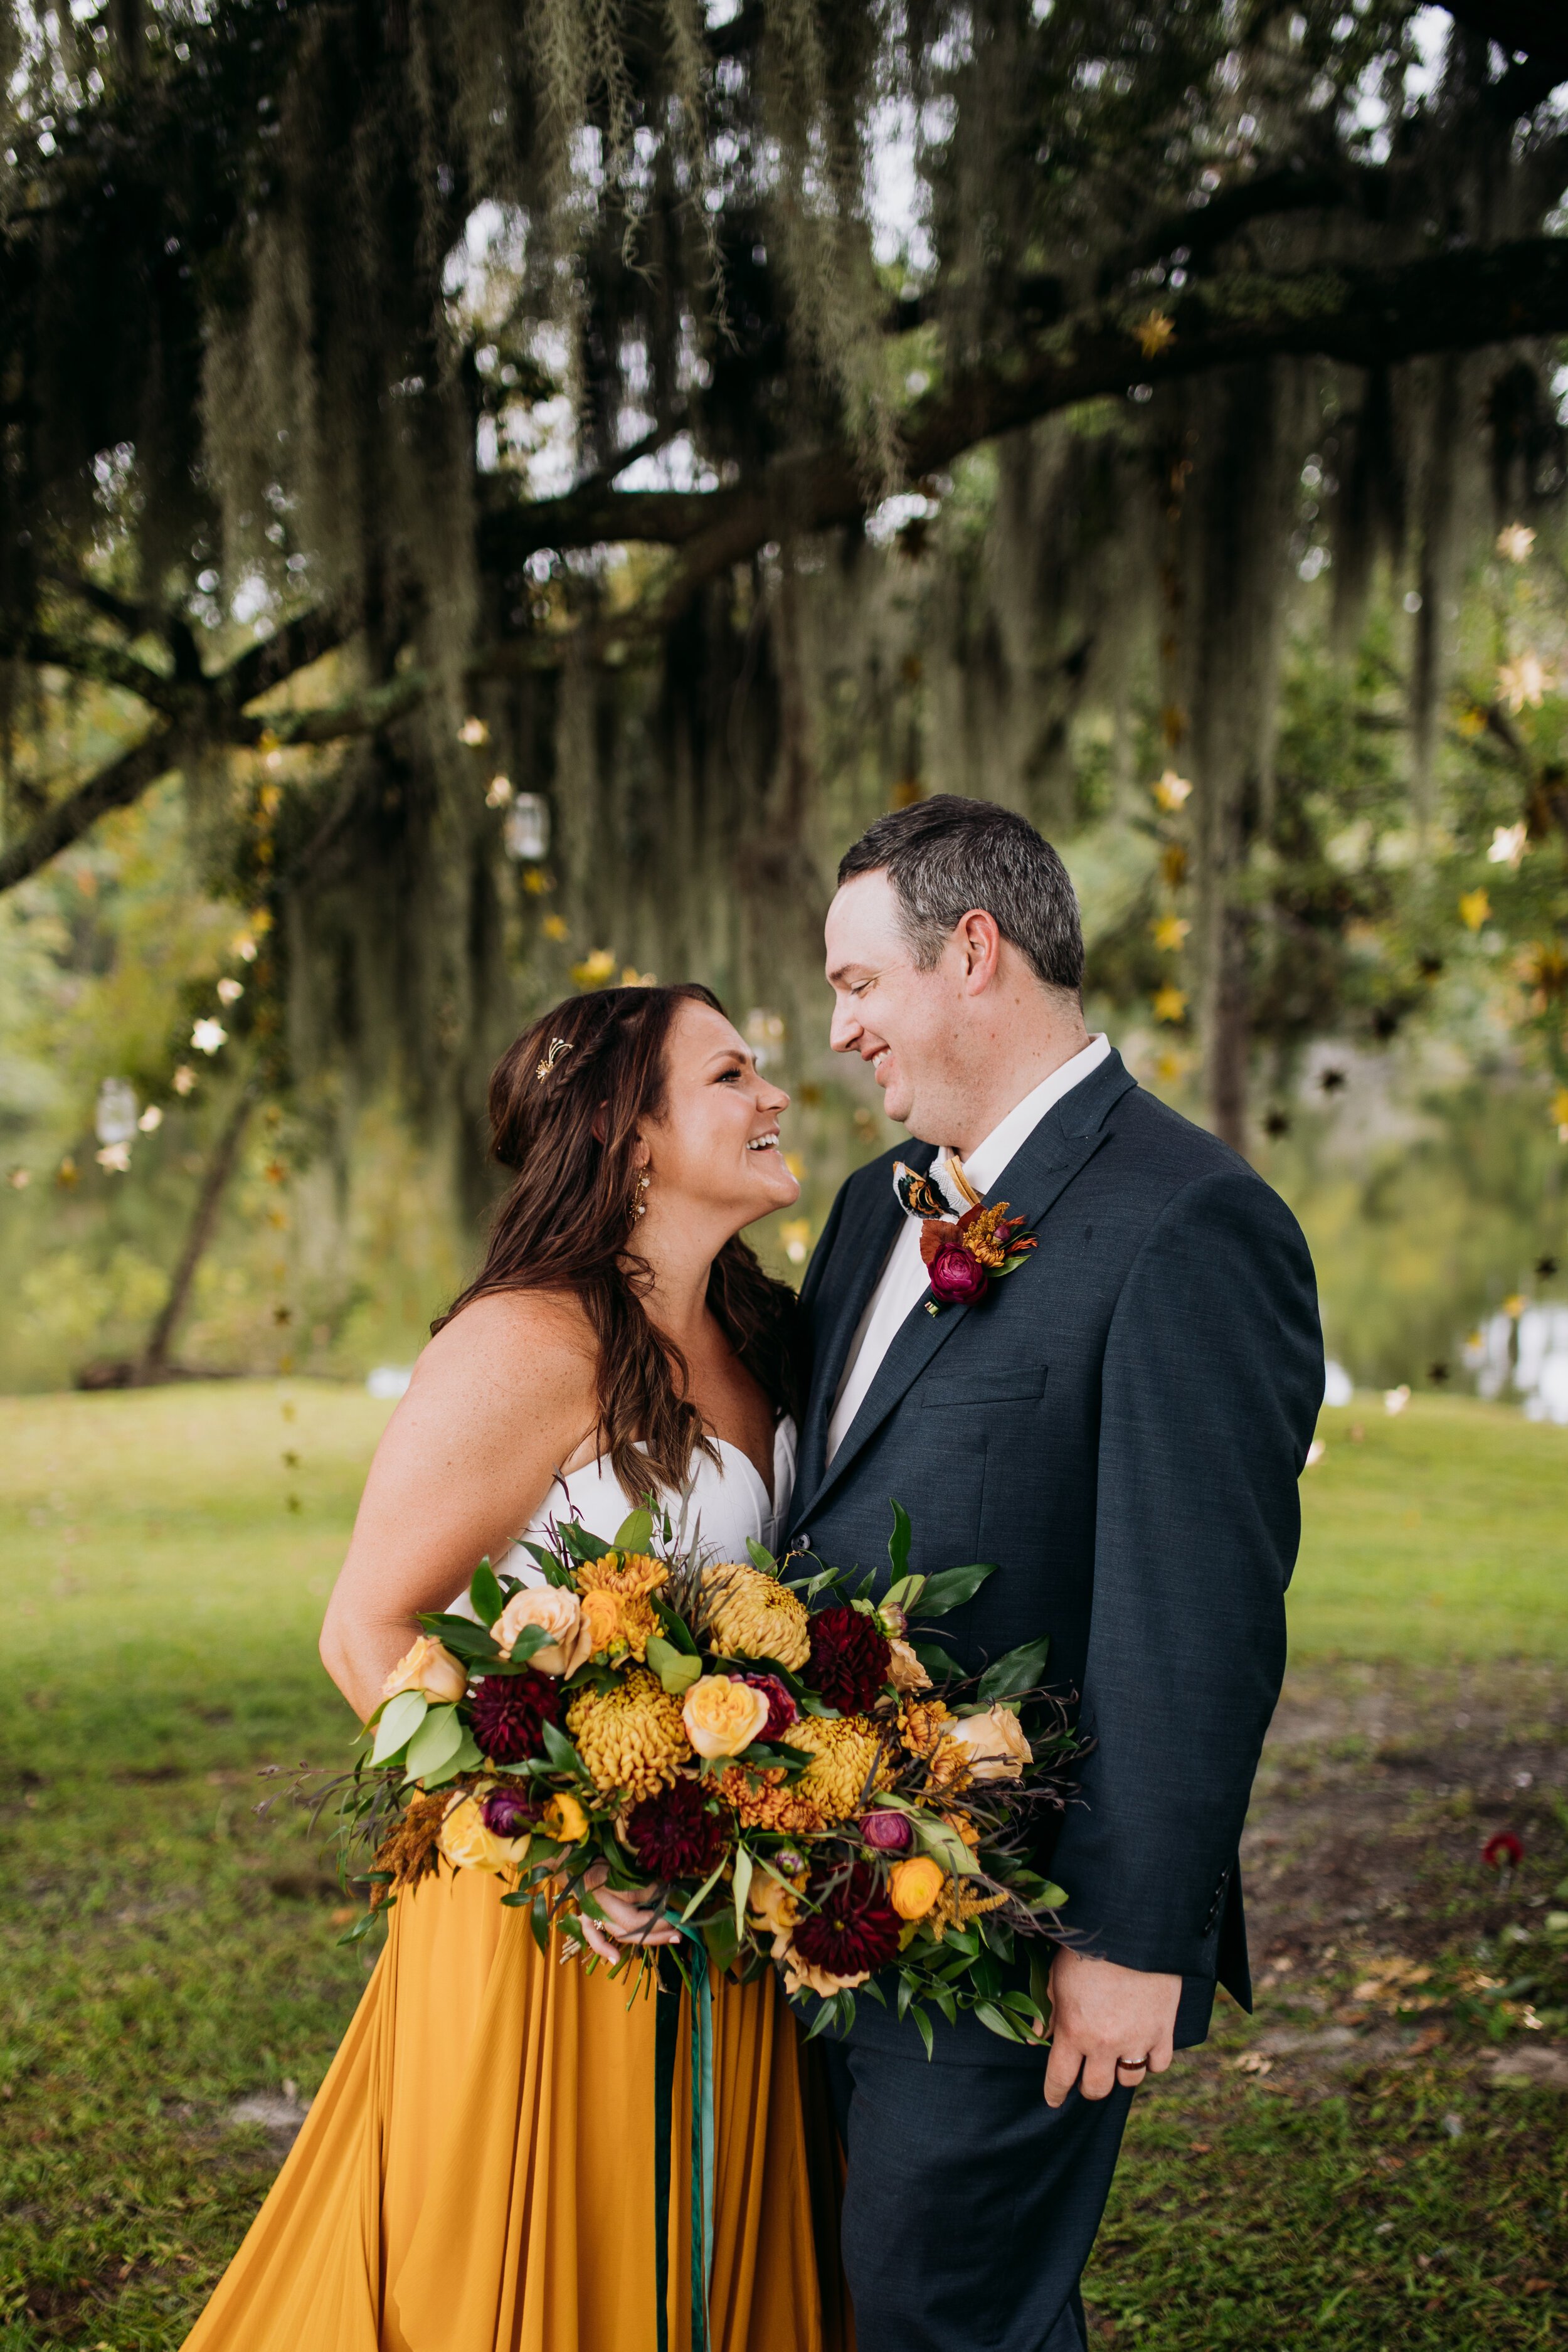 ivory-and-beau-florals-alex-and-david-red-gate-farms-wedding-flowers-wedding-florals-savannah-wedding-savannah-florist-wedding-florist-colorful-rich-bold-inspiration-flowers-Bowles373.jpg